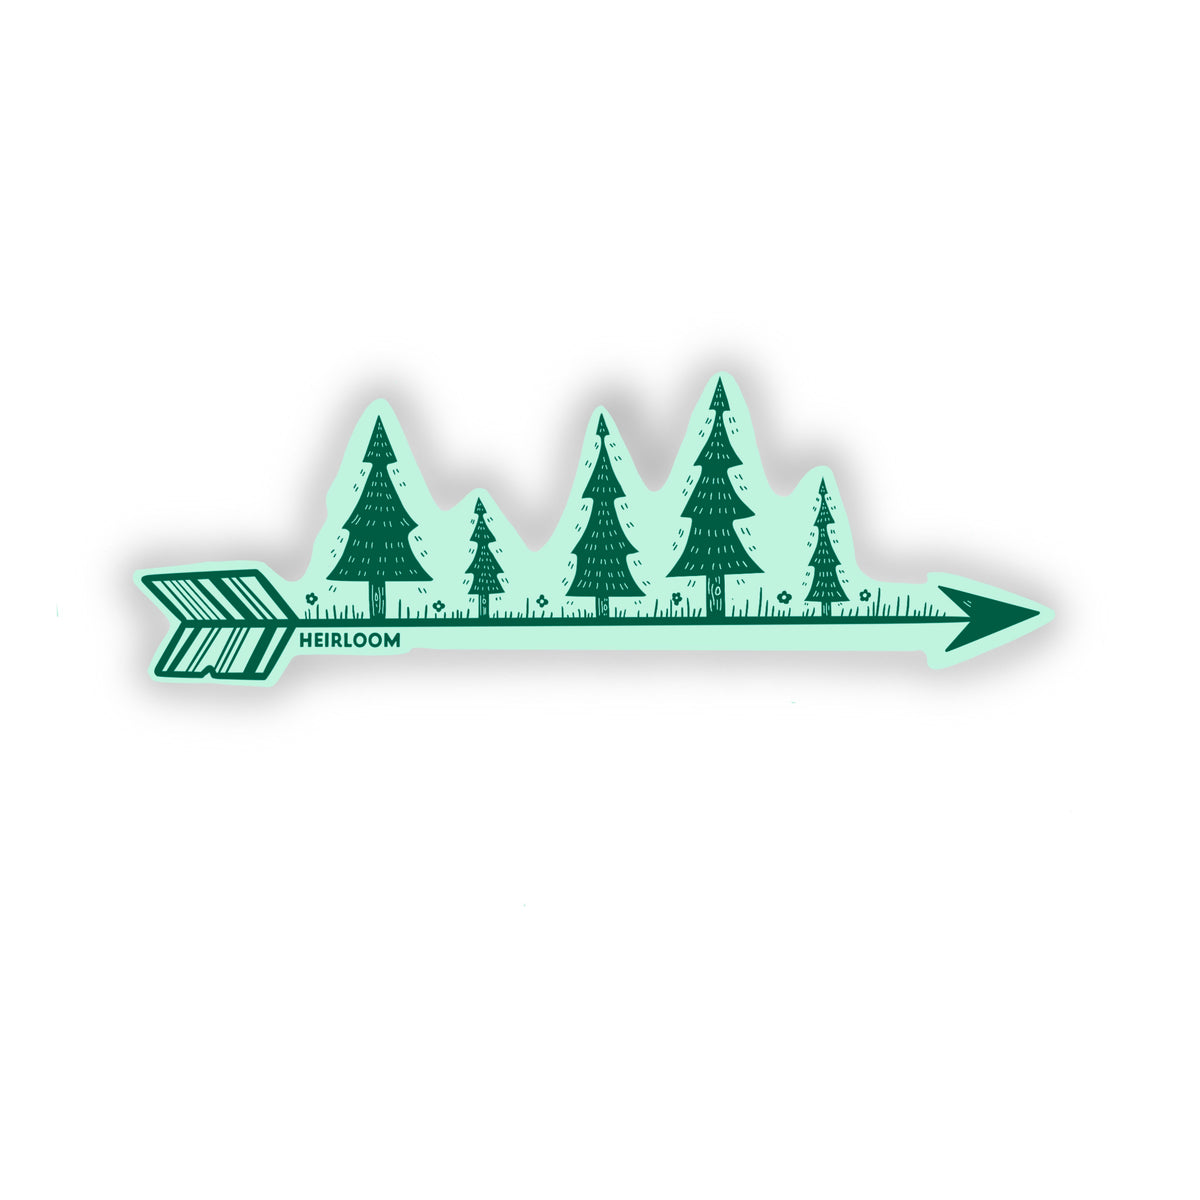 A light green background with dark green design featuring an arrow with flowers and grass and 5 trees growing out of the wood part of the arrow.